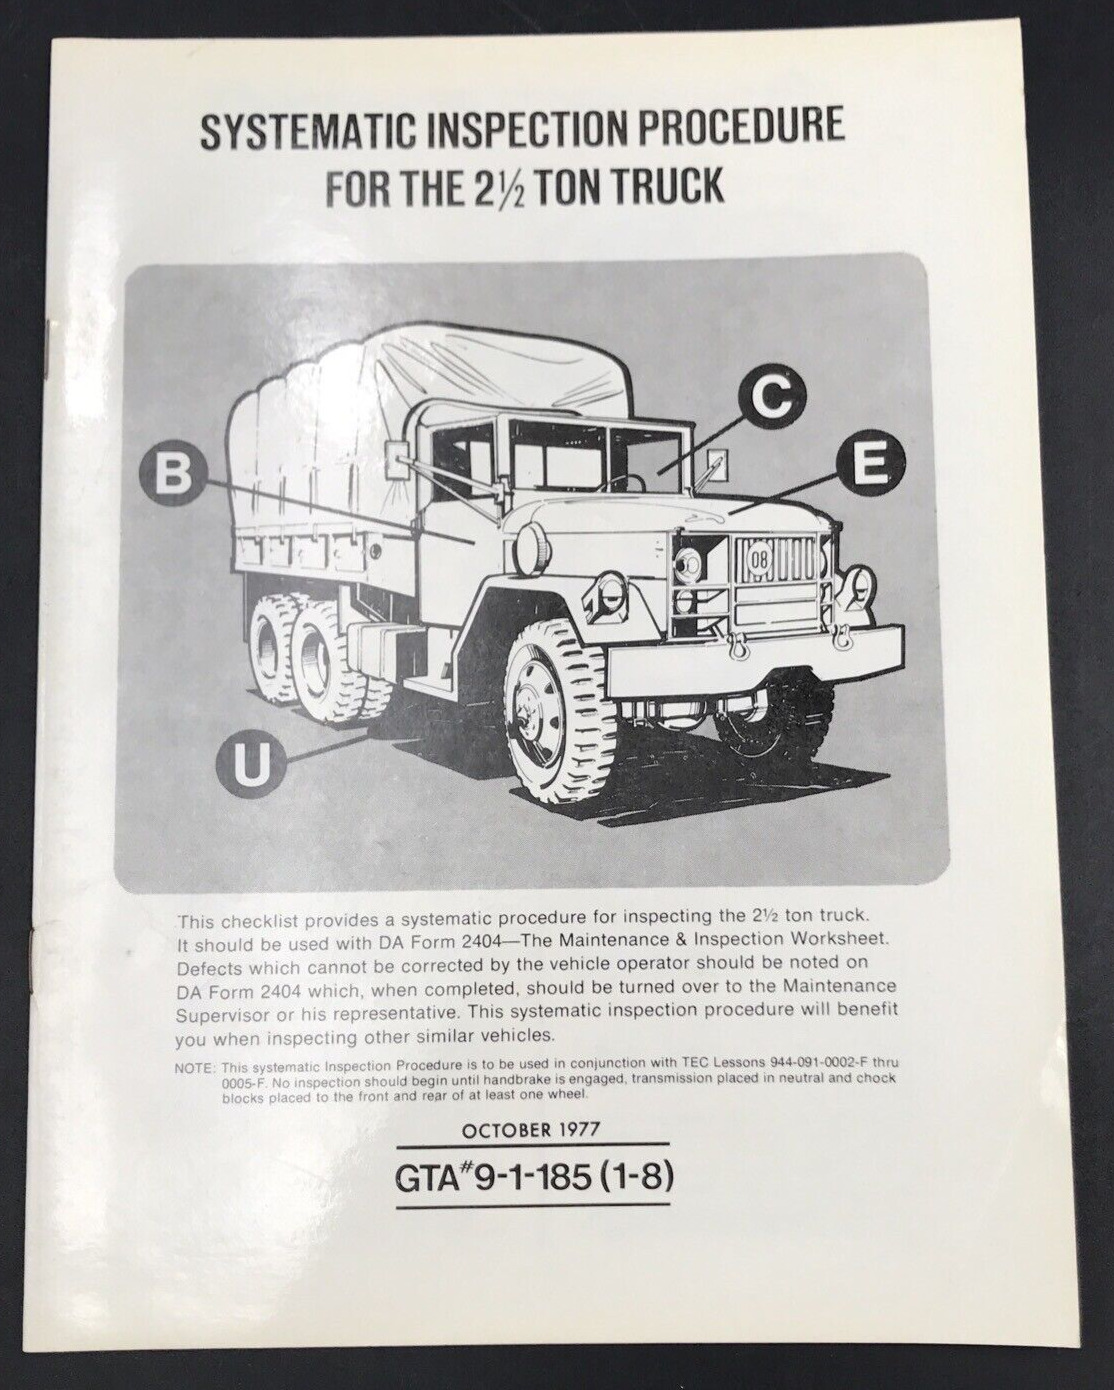 October 1977 US Military Systematic Inspection Procedure for 2.5 Ton Truck